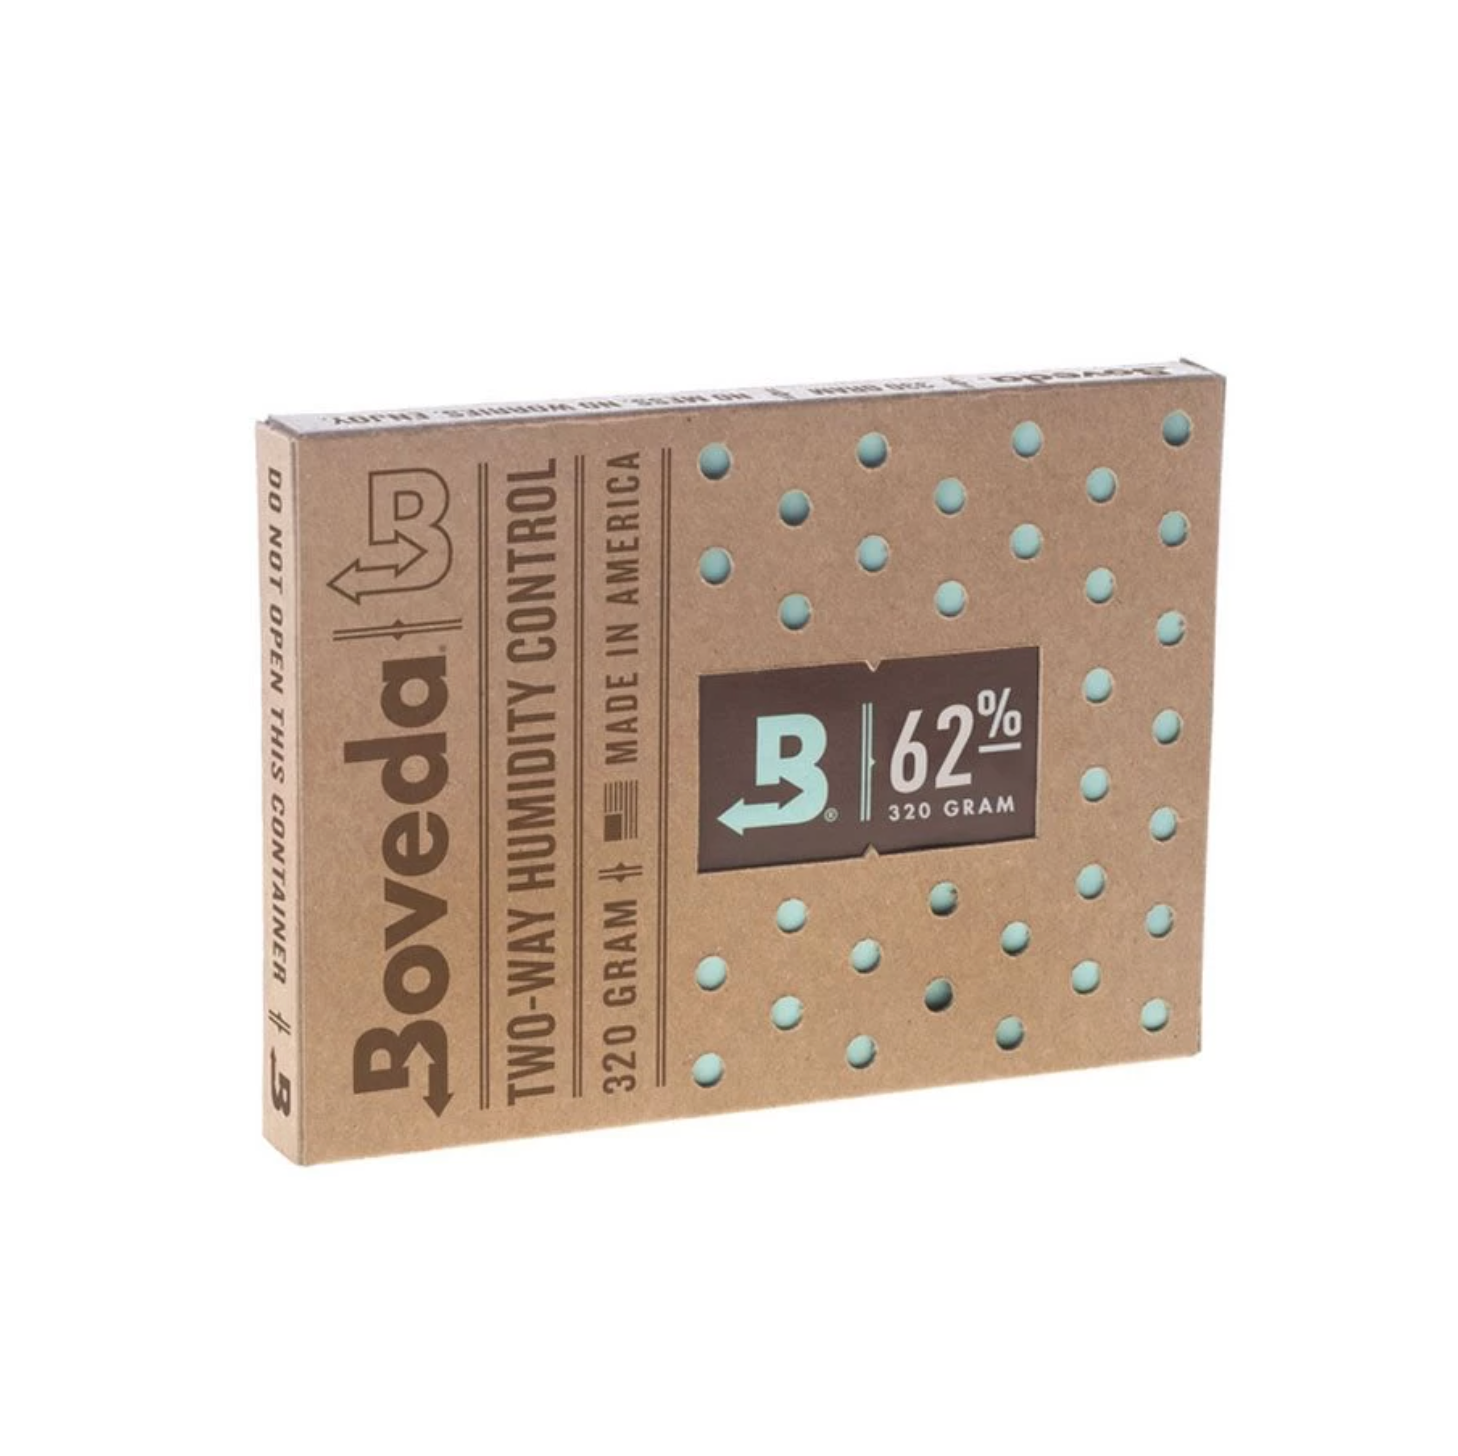 Picture of Boveda 320g 62% Single Package